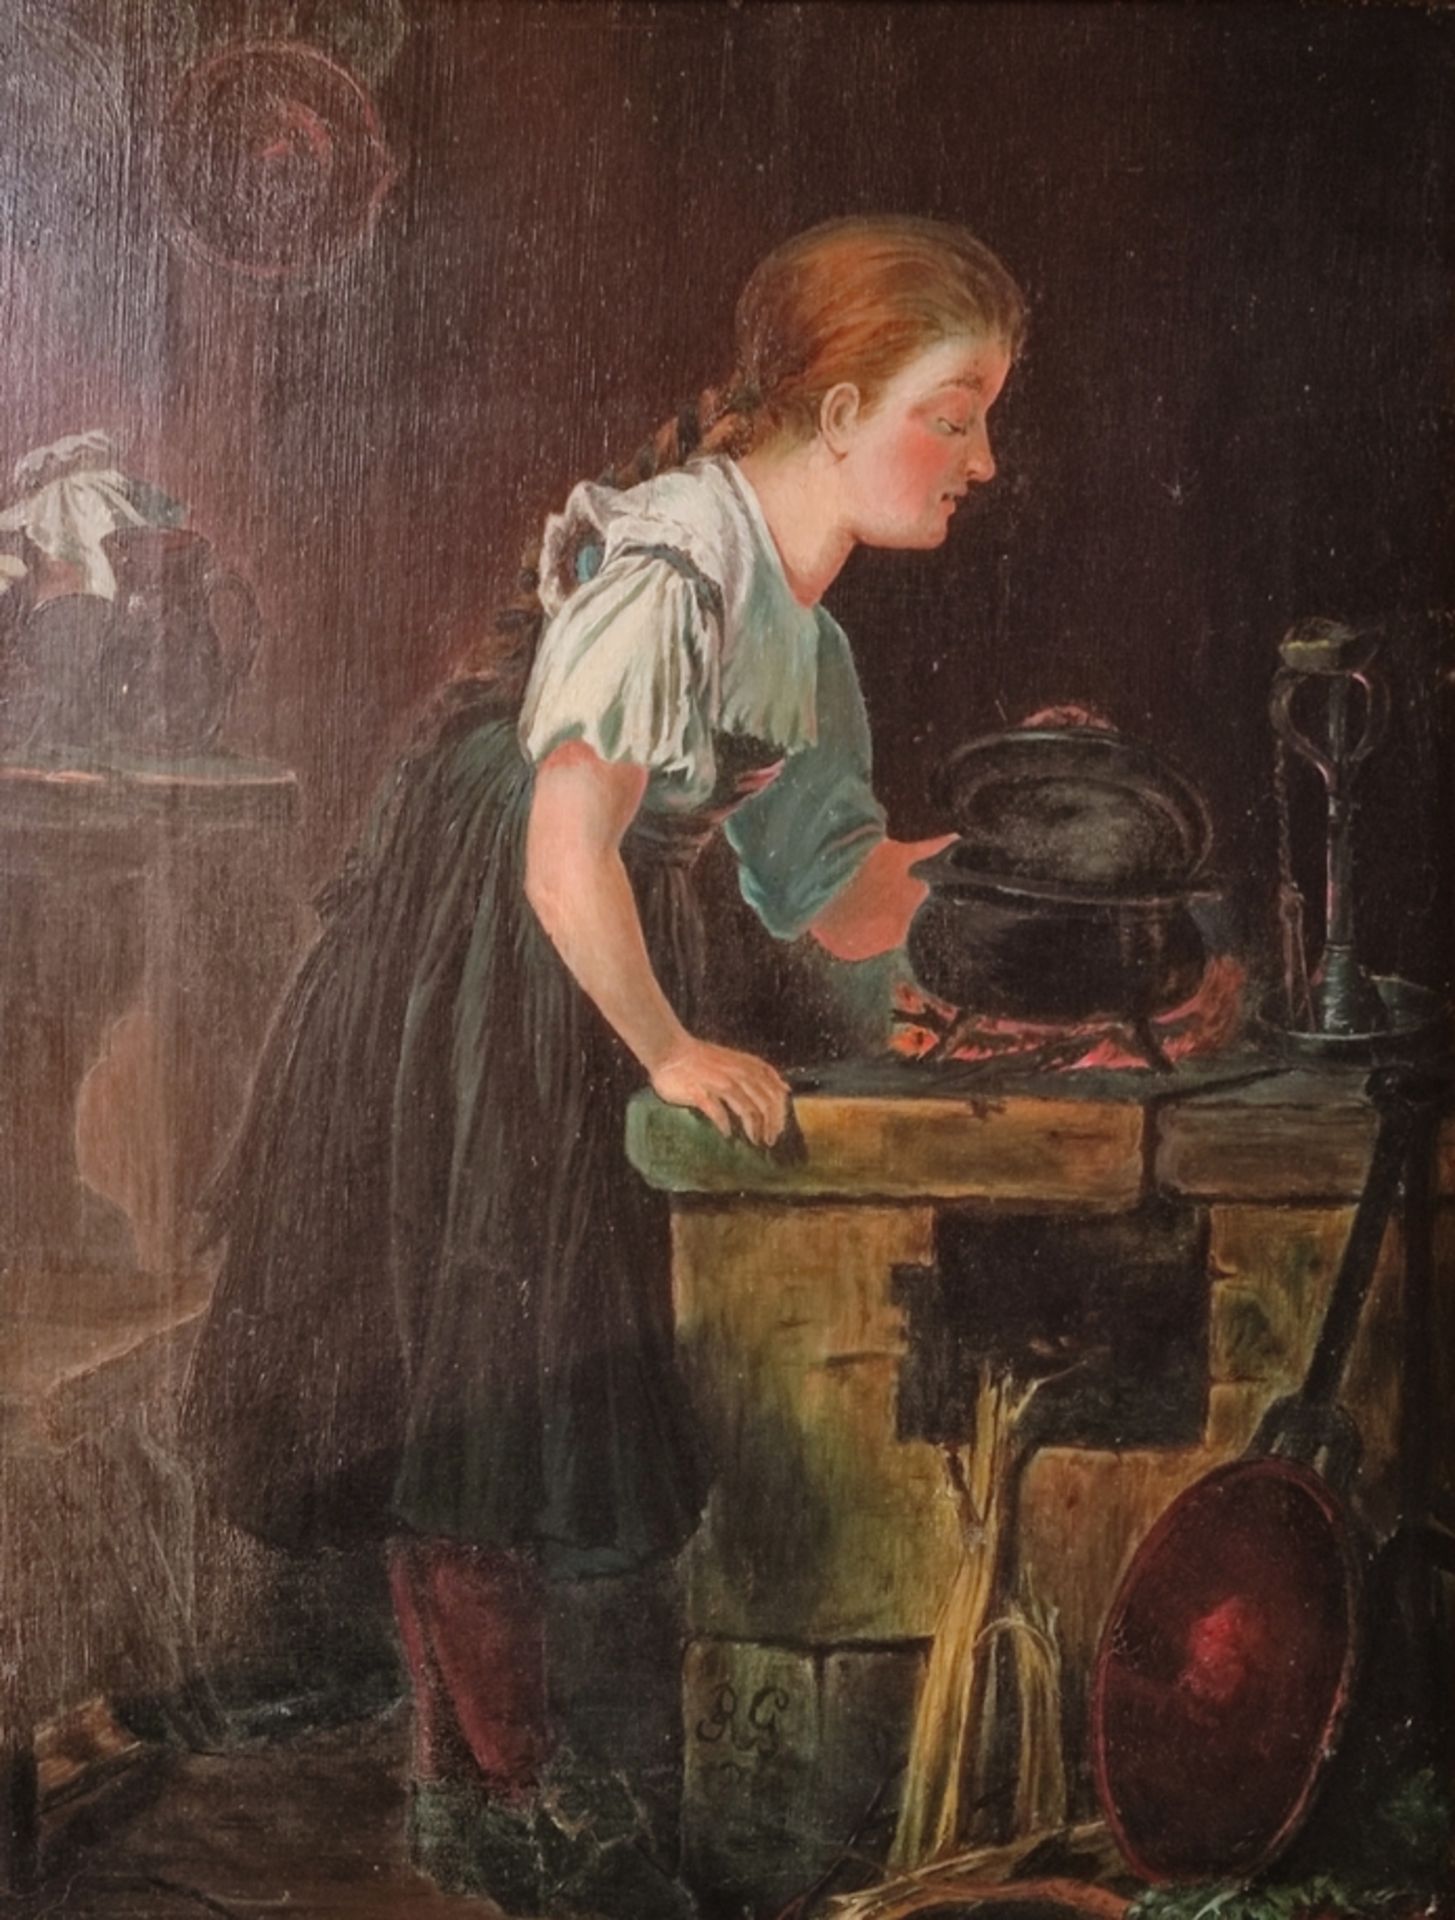 Monogramist (19th century) "At the stove", young woman looking into a pot, oil on canvas, monogramm